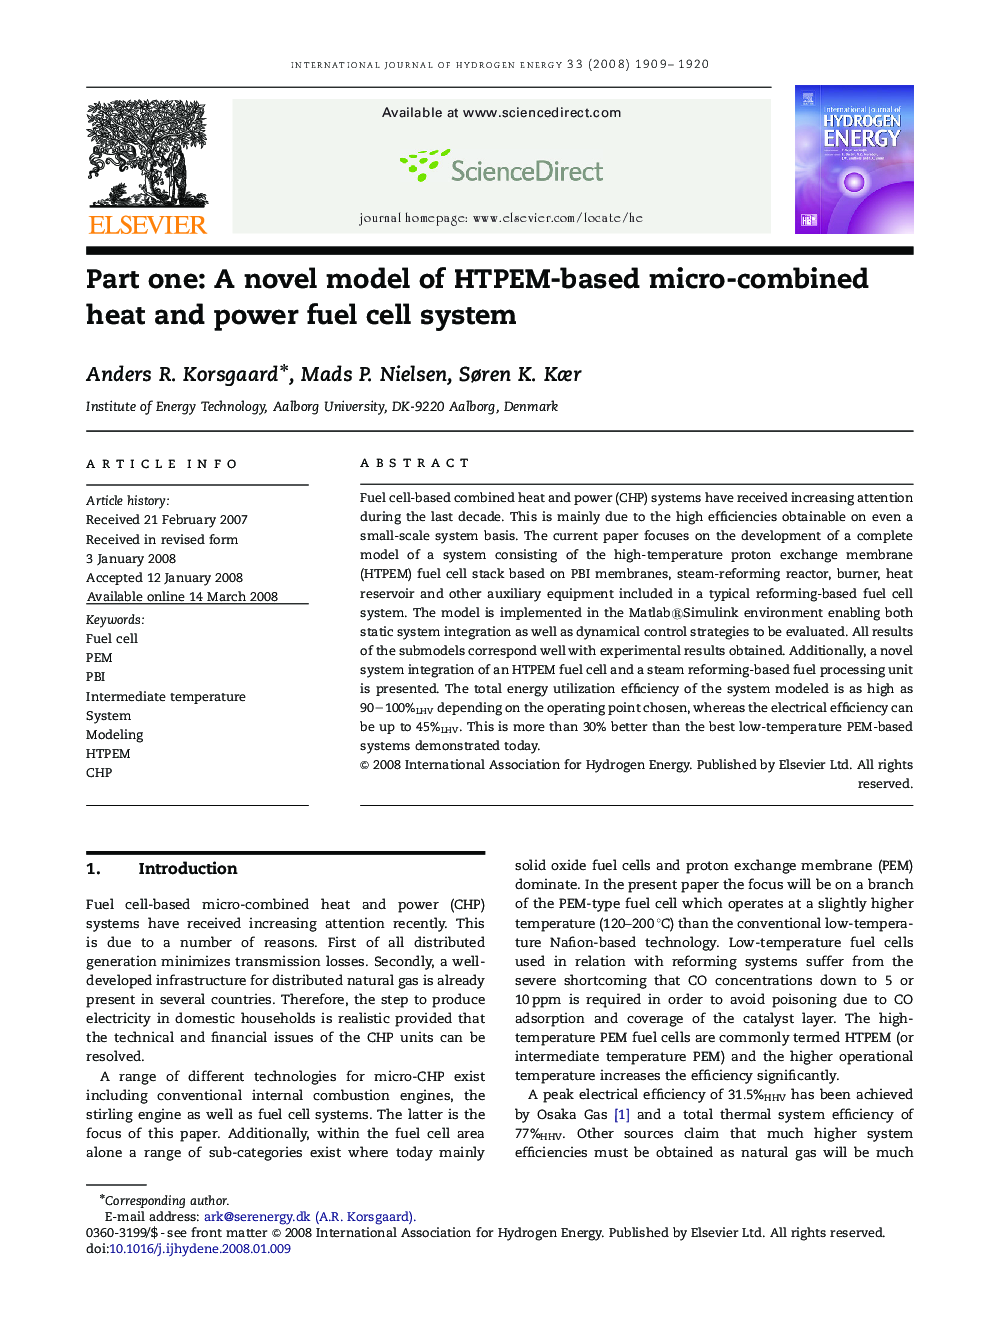 Part one: A novel model of HTPEM-based micro-combined heat and power fuel cell system